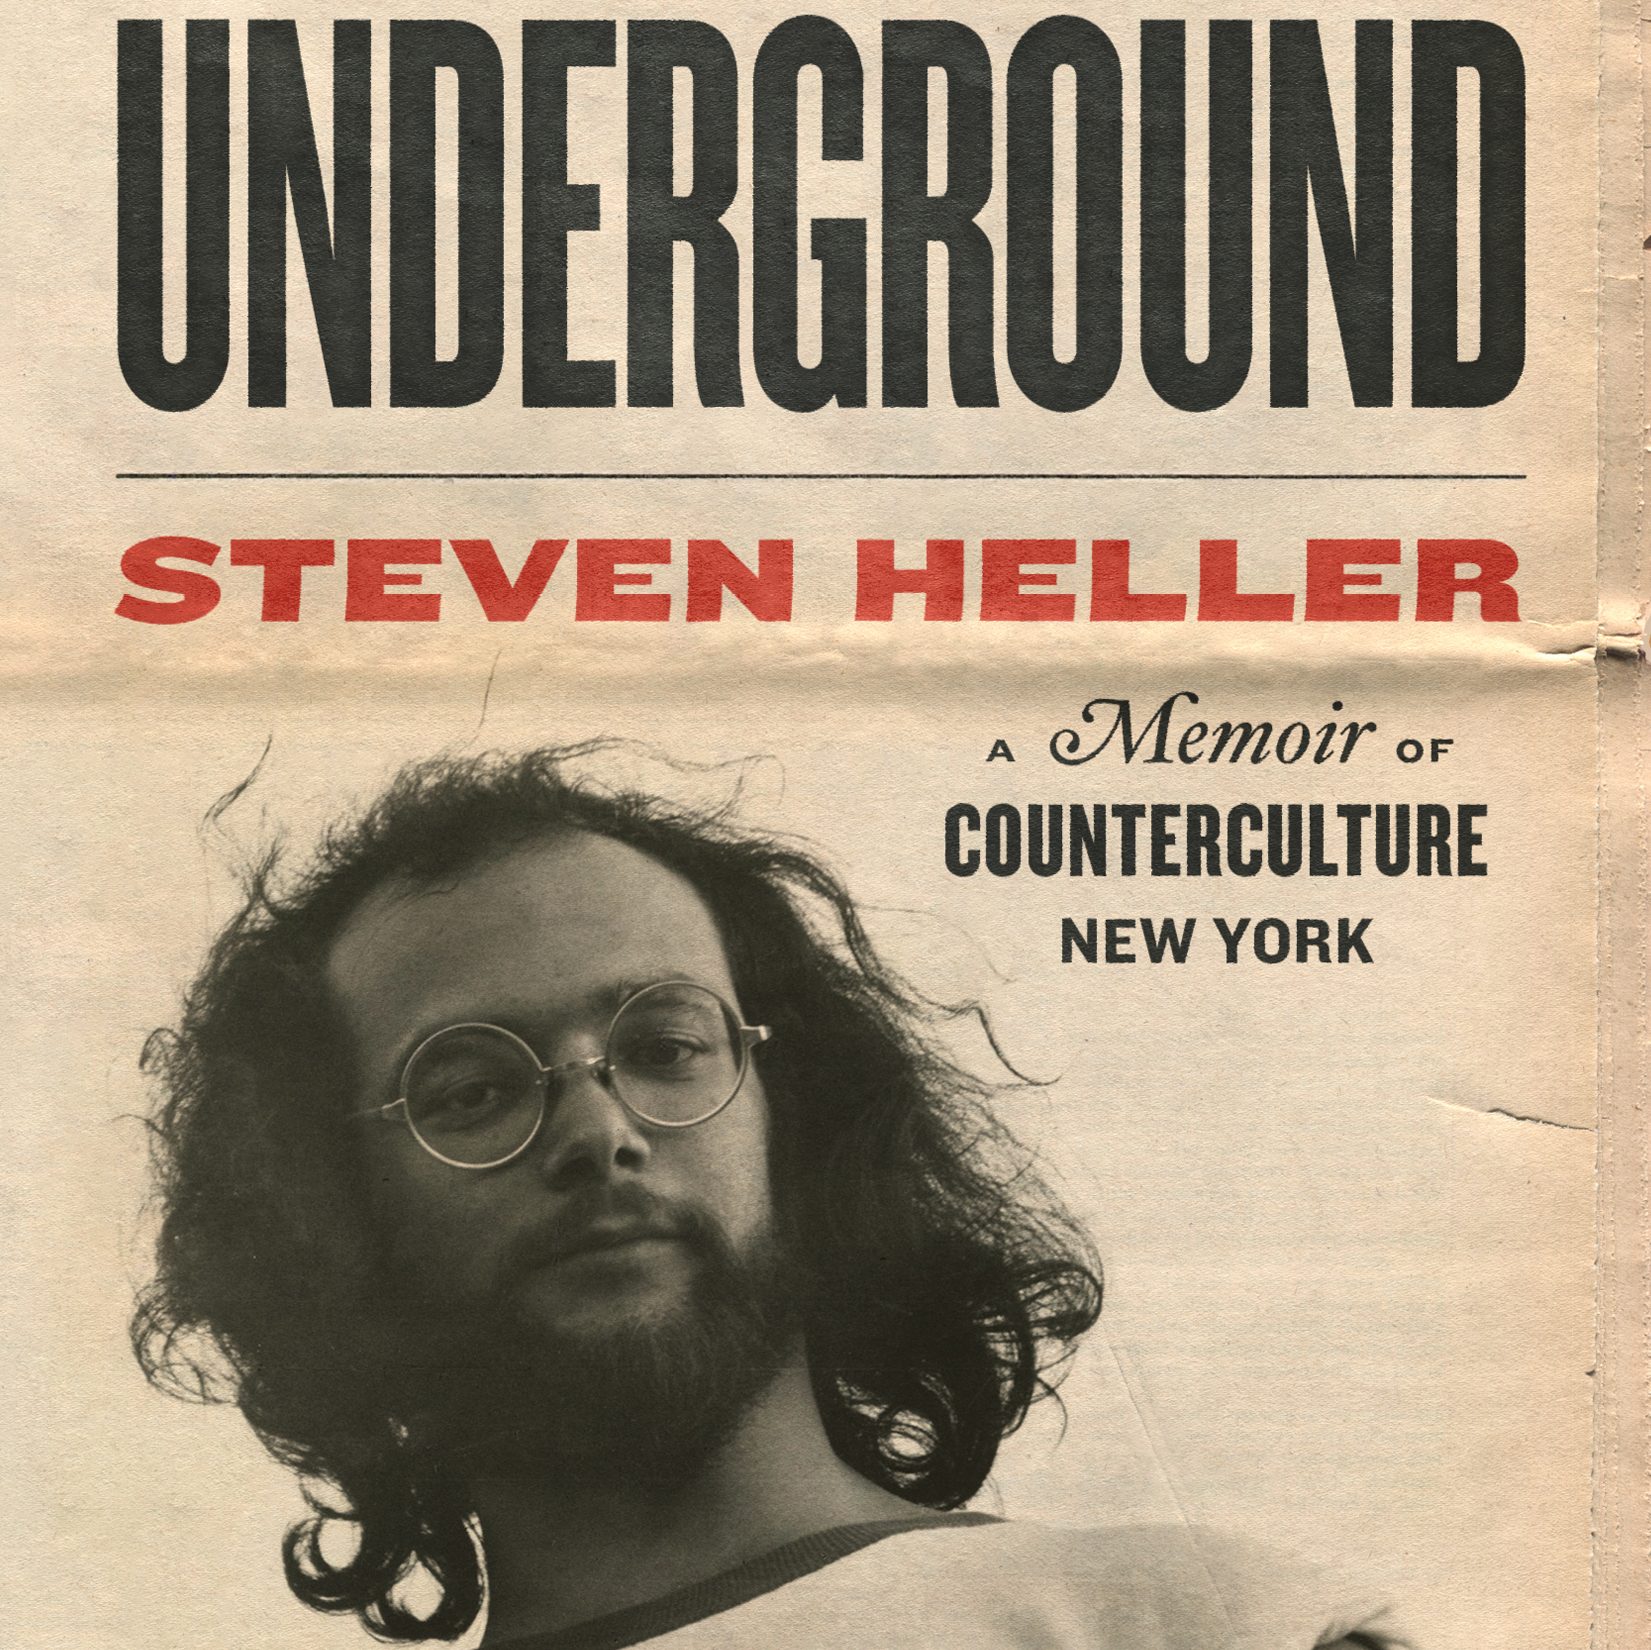 A photo image of a young Steven Heller.